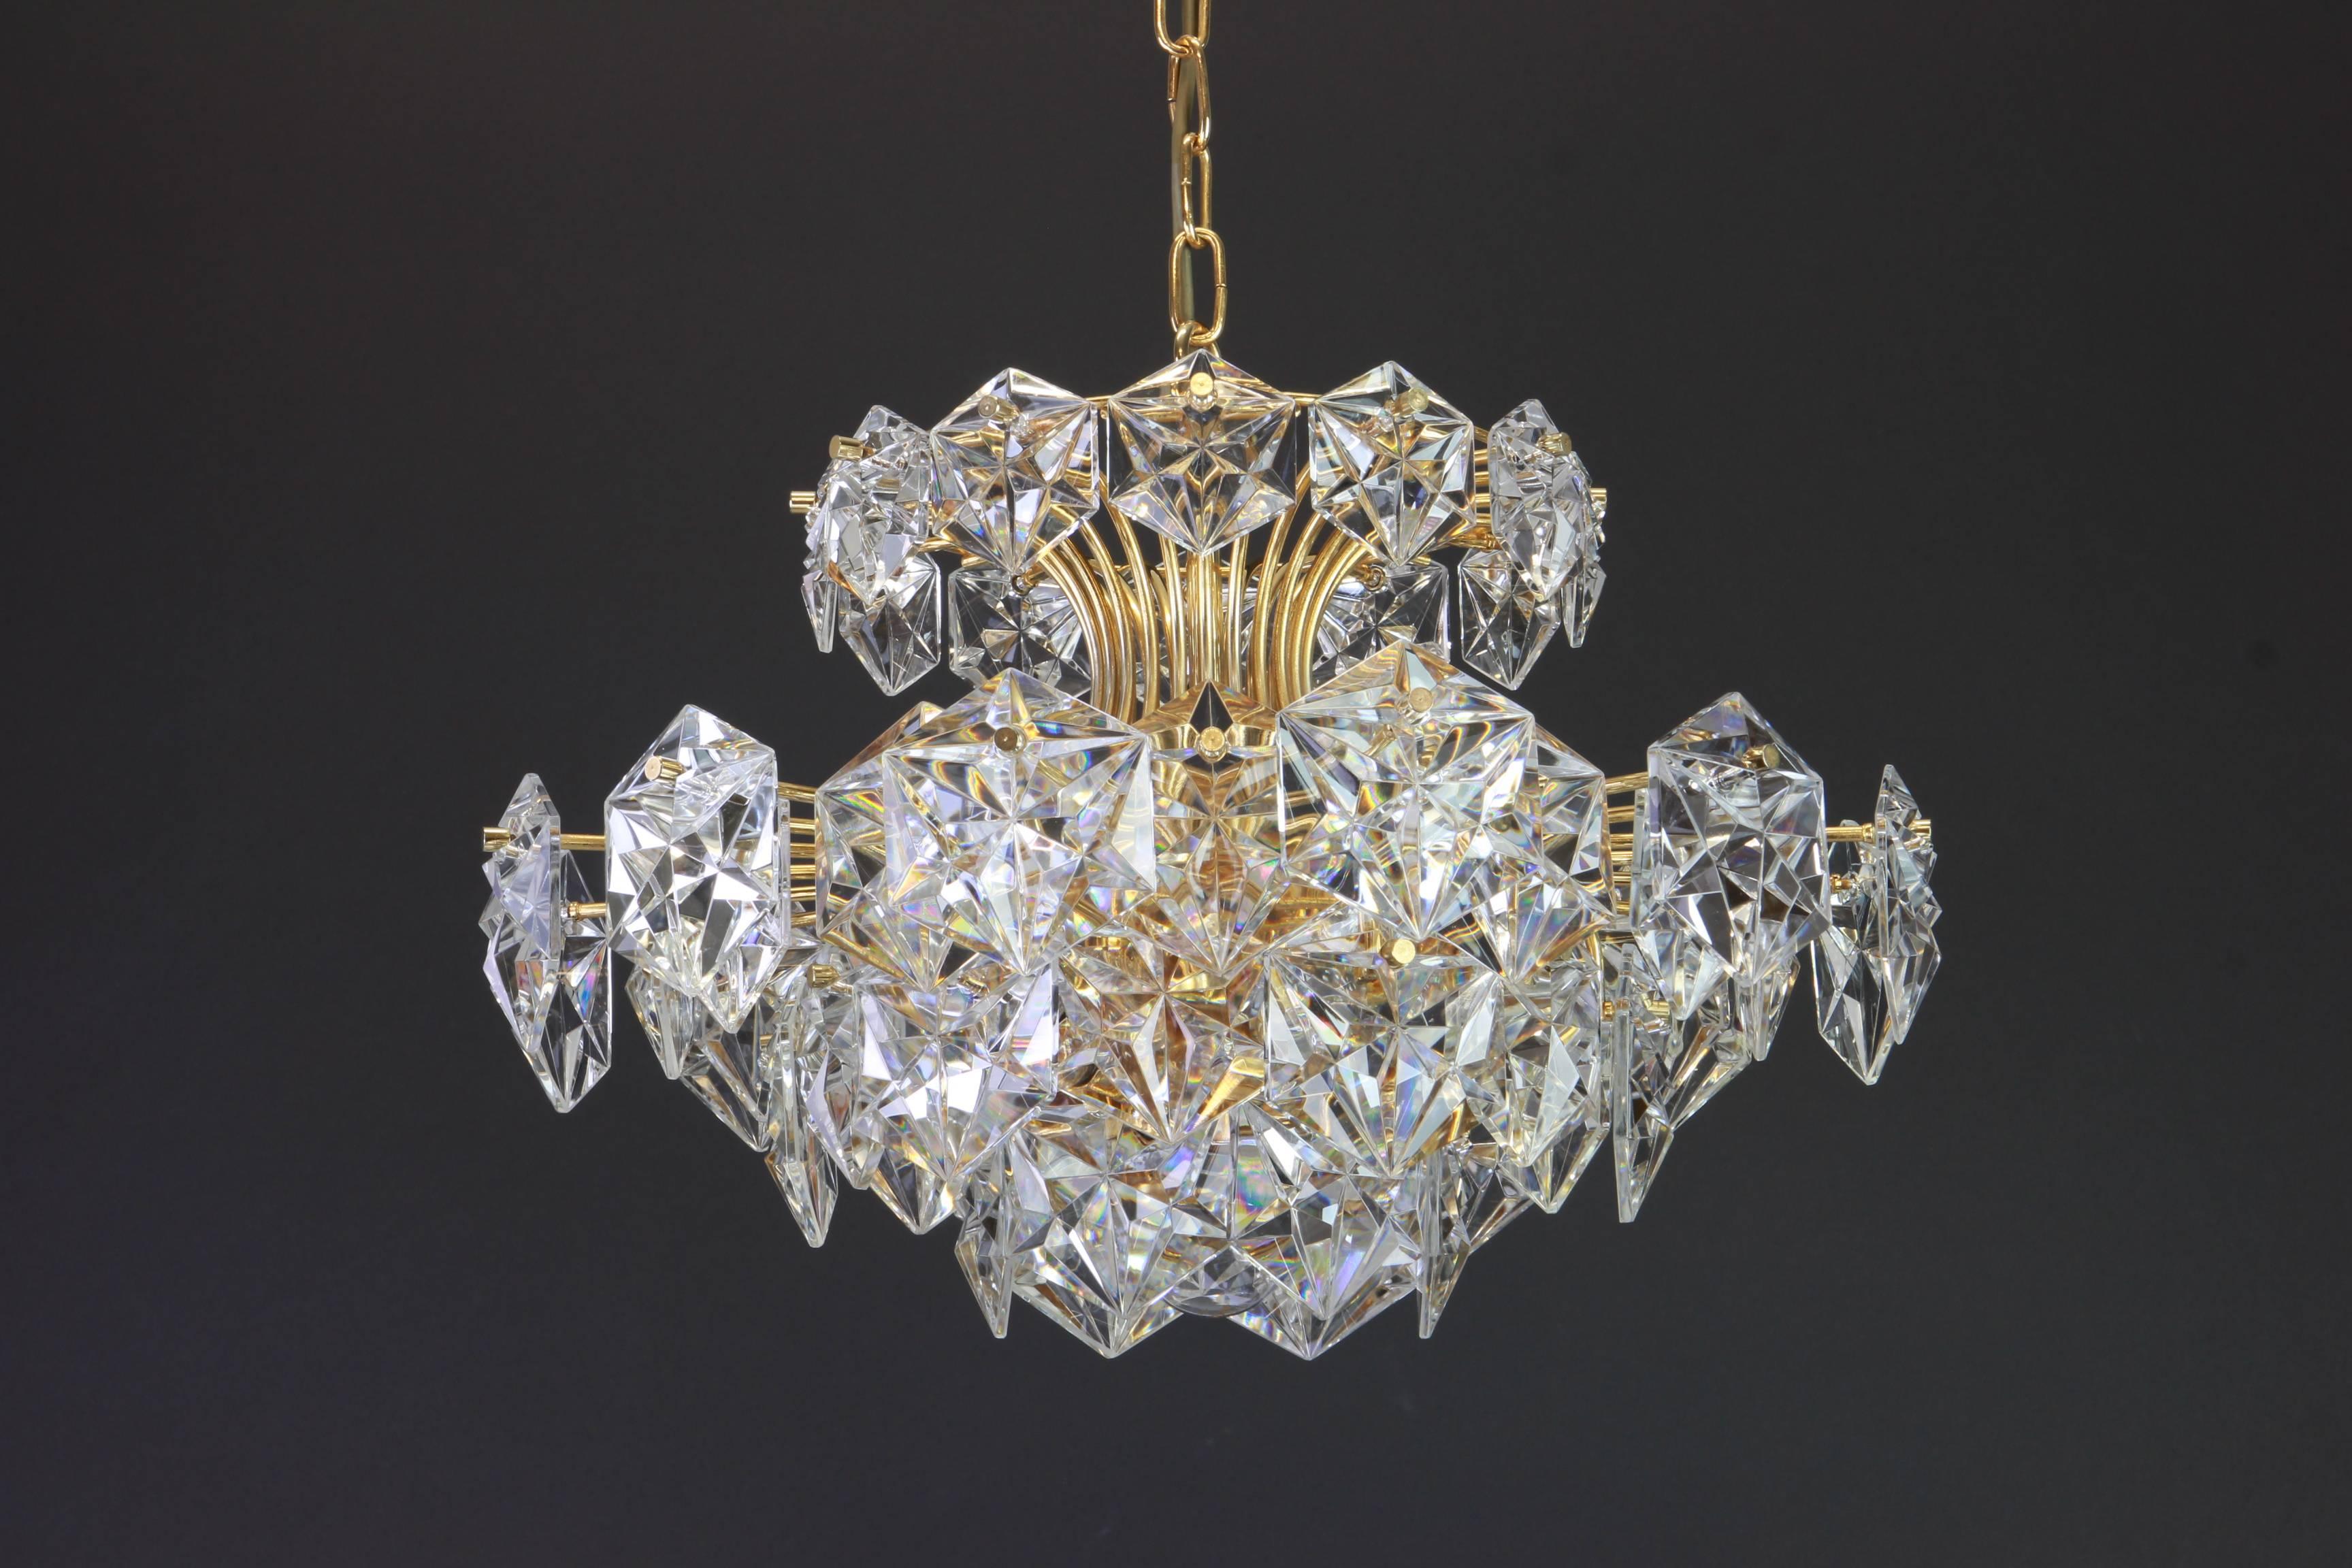 A stunning five-tier chandelier by Kinkeldey, Germany, manufactured in circa 1970-1979. A handmade and high quality piece. The chandelier features a 24 karat gold-plated five-tier structure with lots of facetted crystal glass elements.

High quality